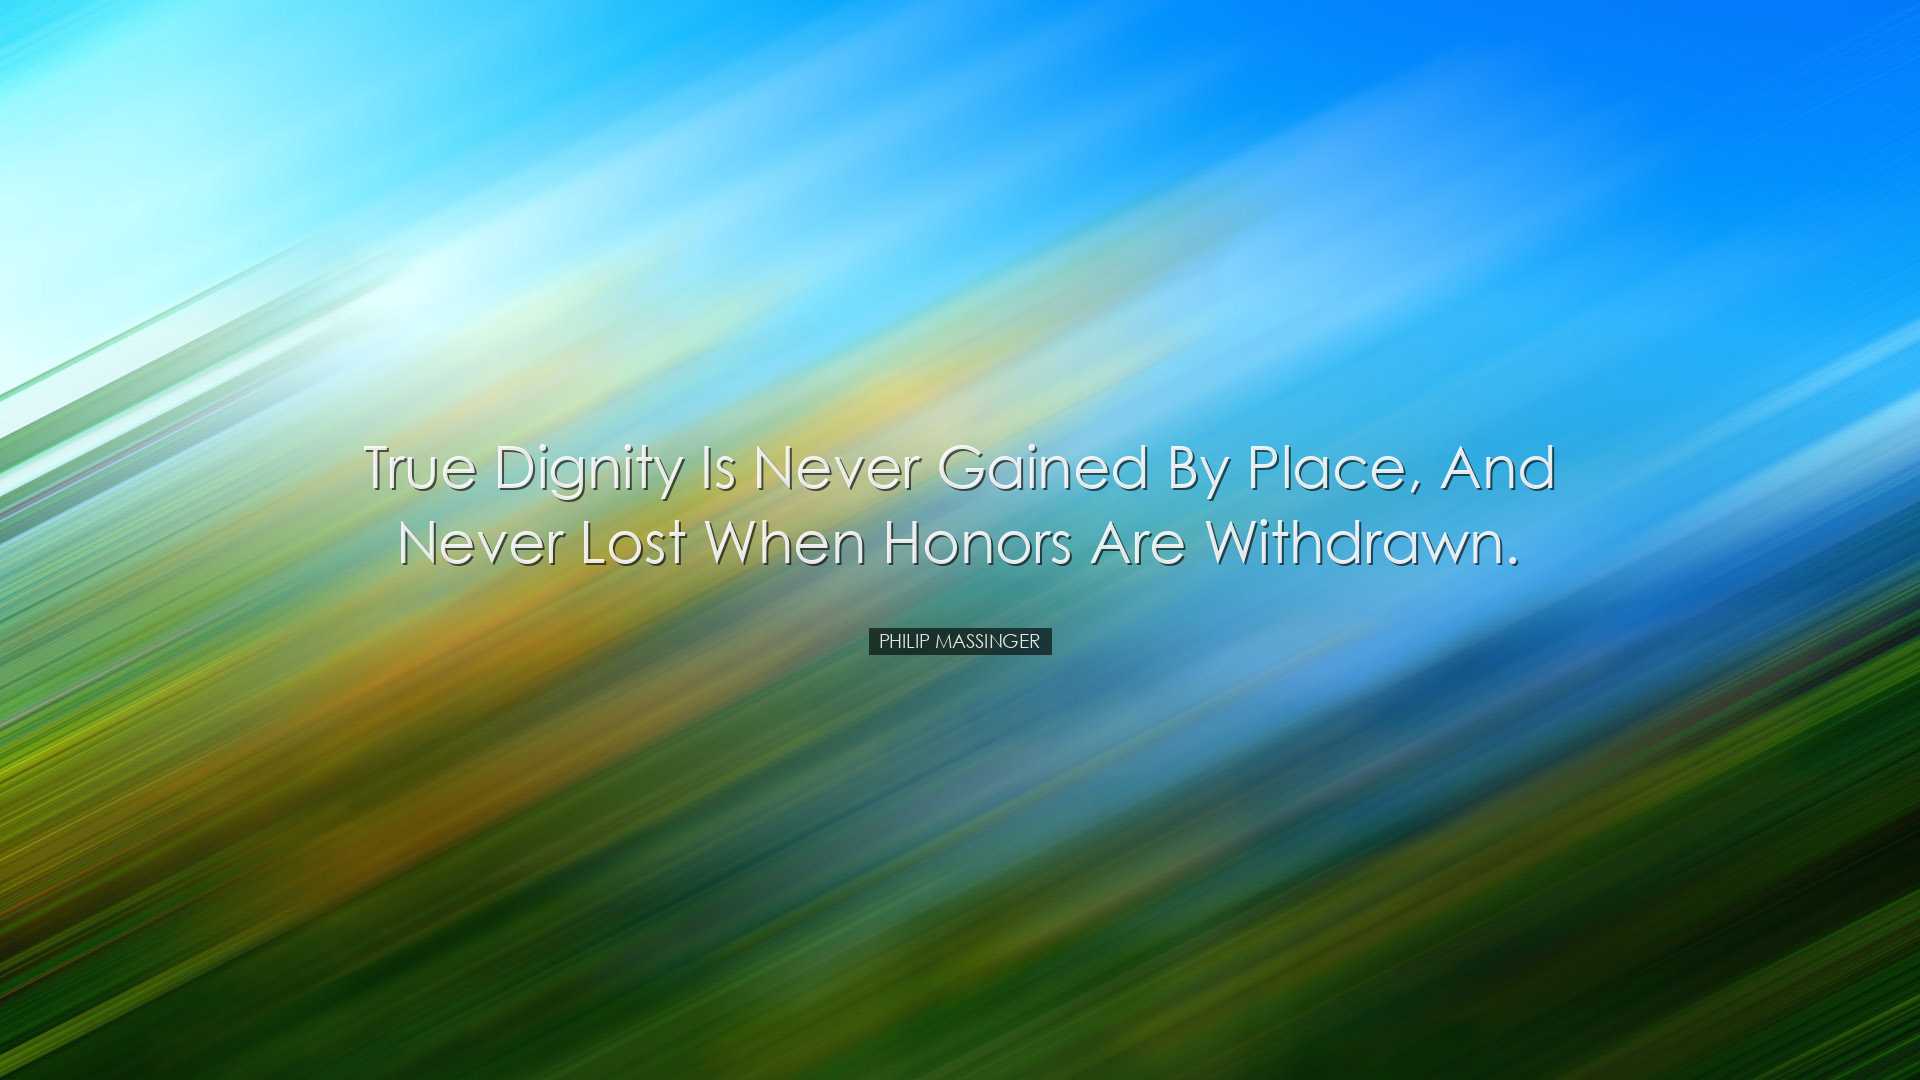 True dignity is never gained by place, and never lost when honors